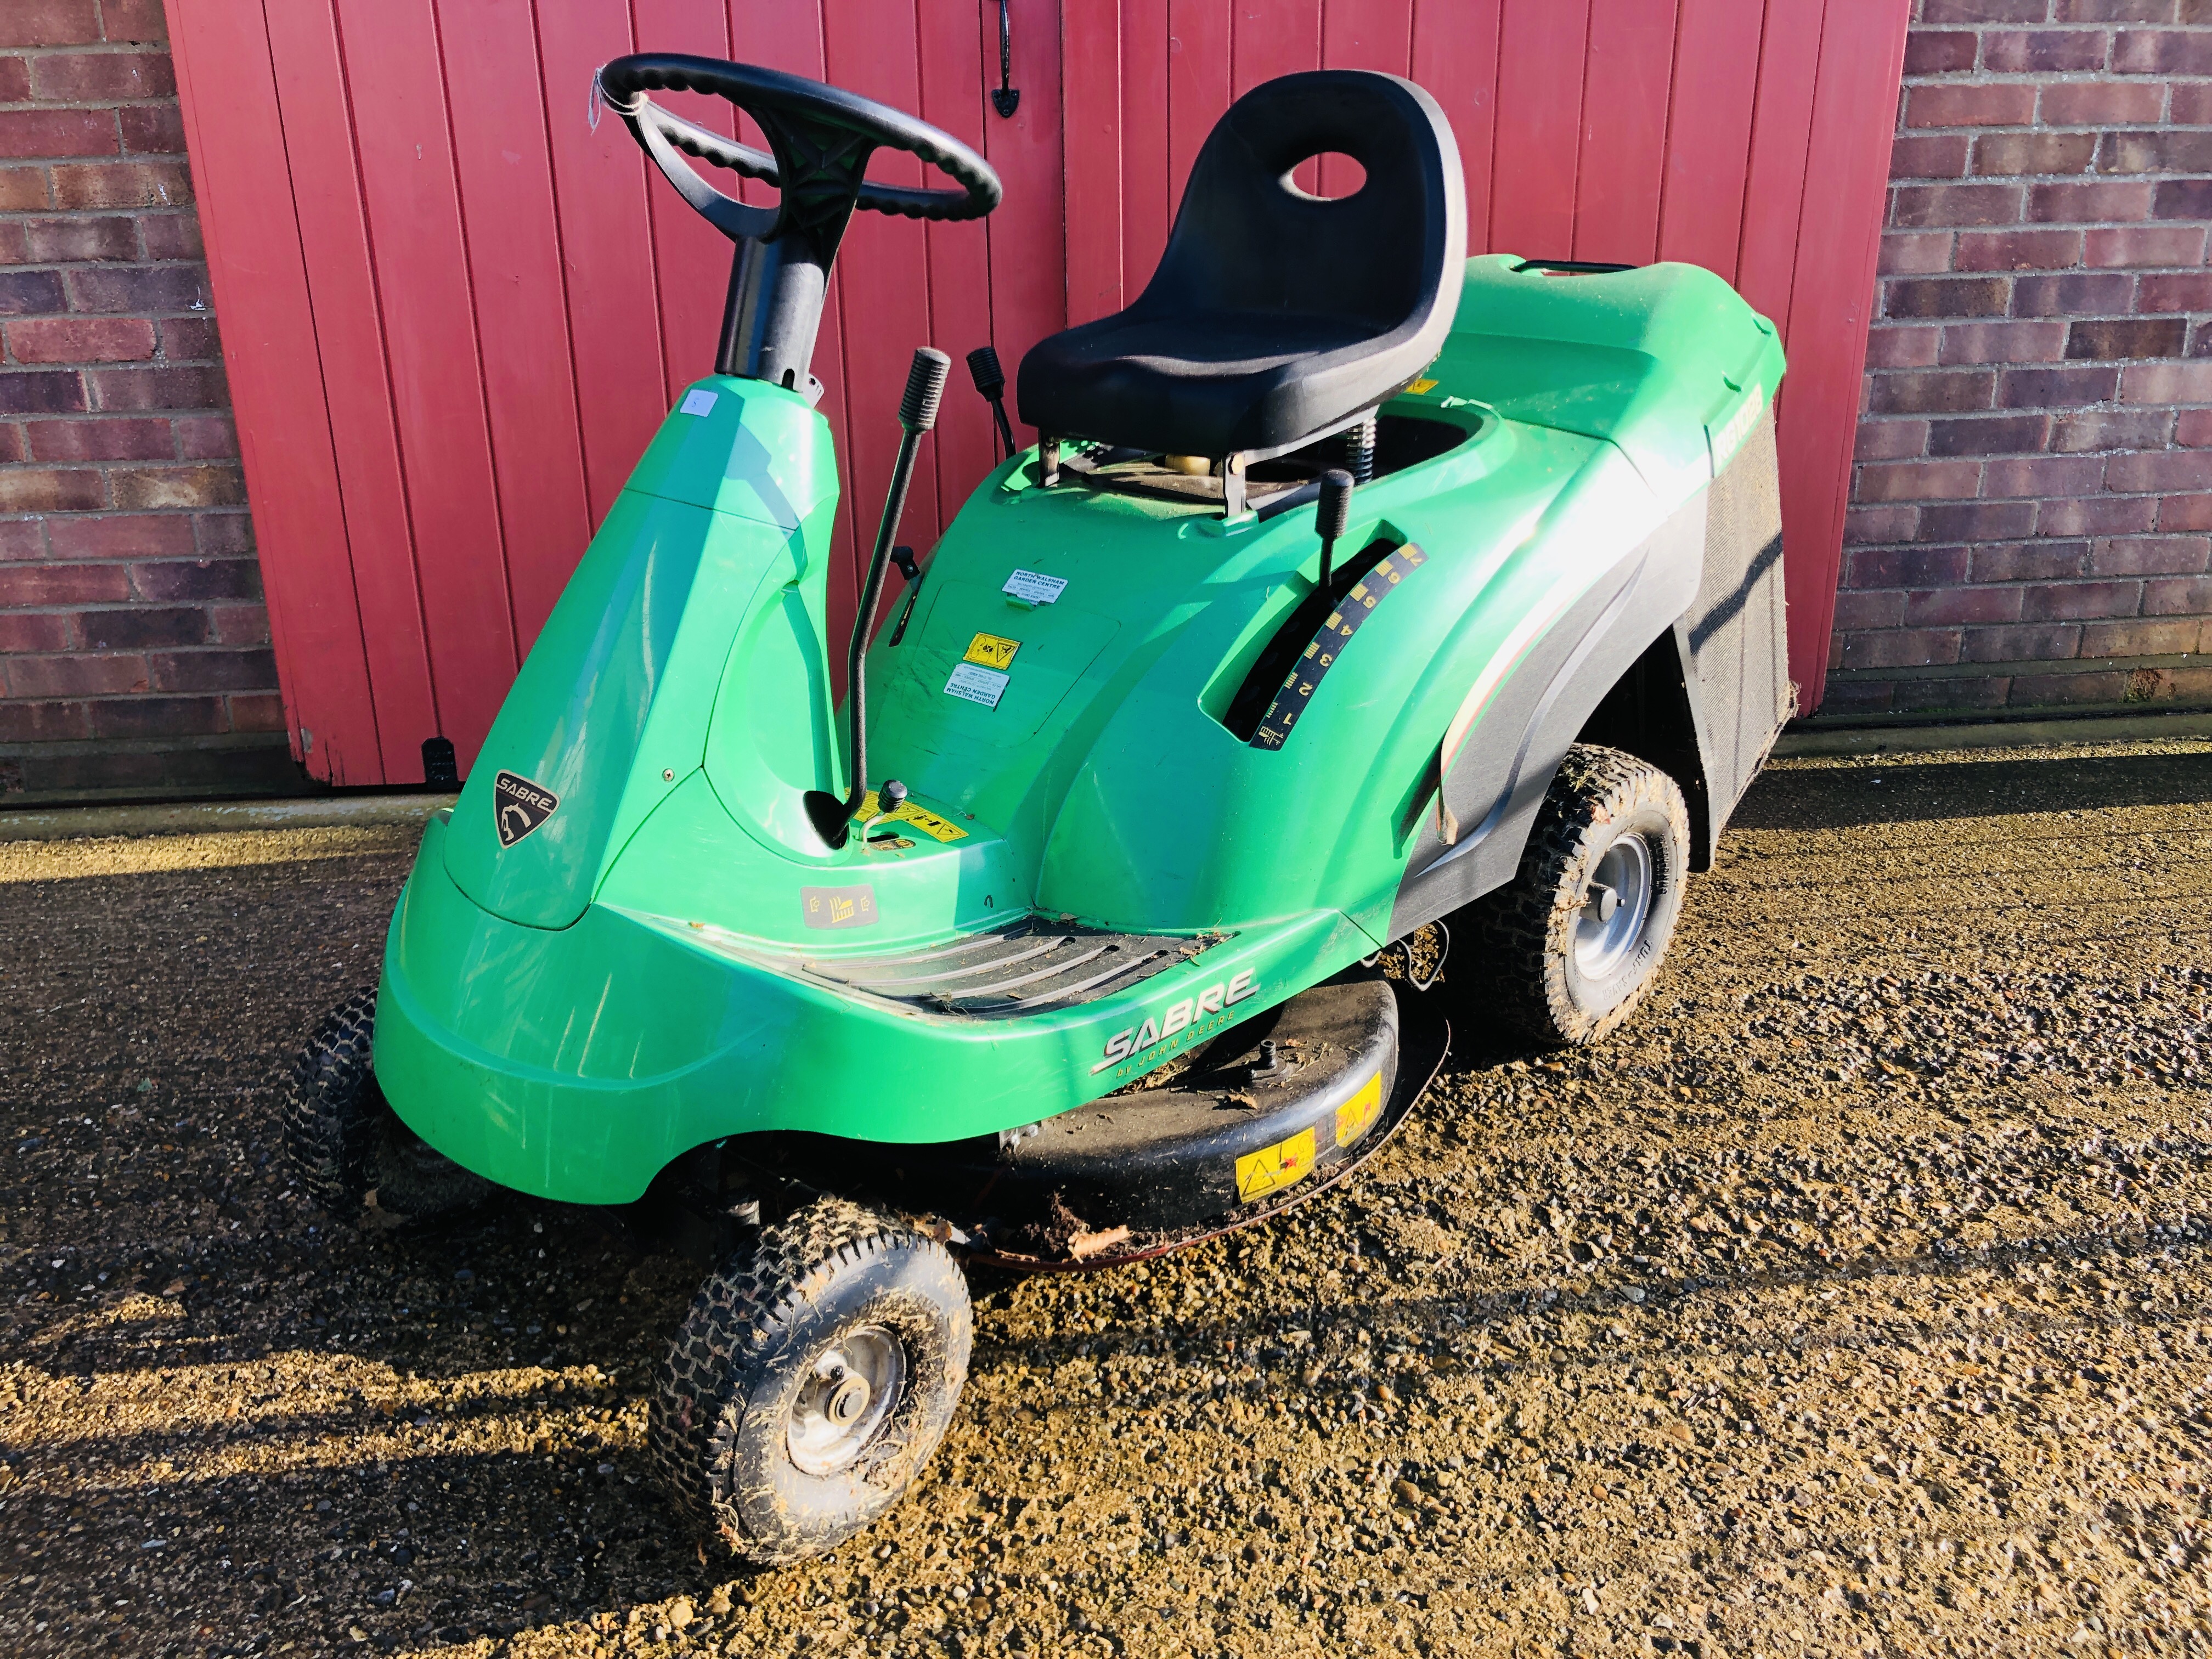 JOHN DEERE SABRE RIDE ON LAWN MOWER WITH GRASS COLLECTOR,